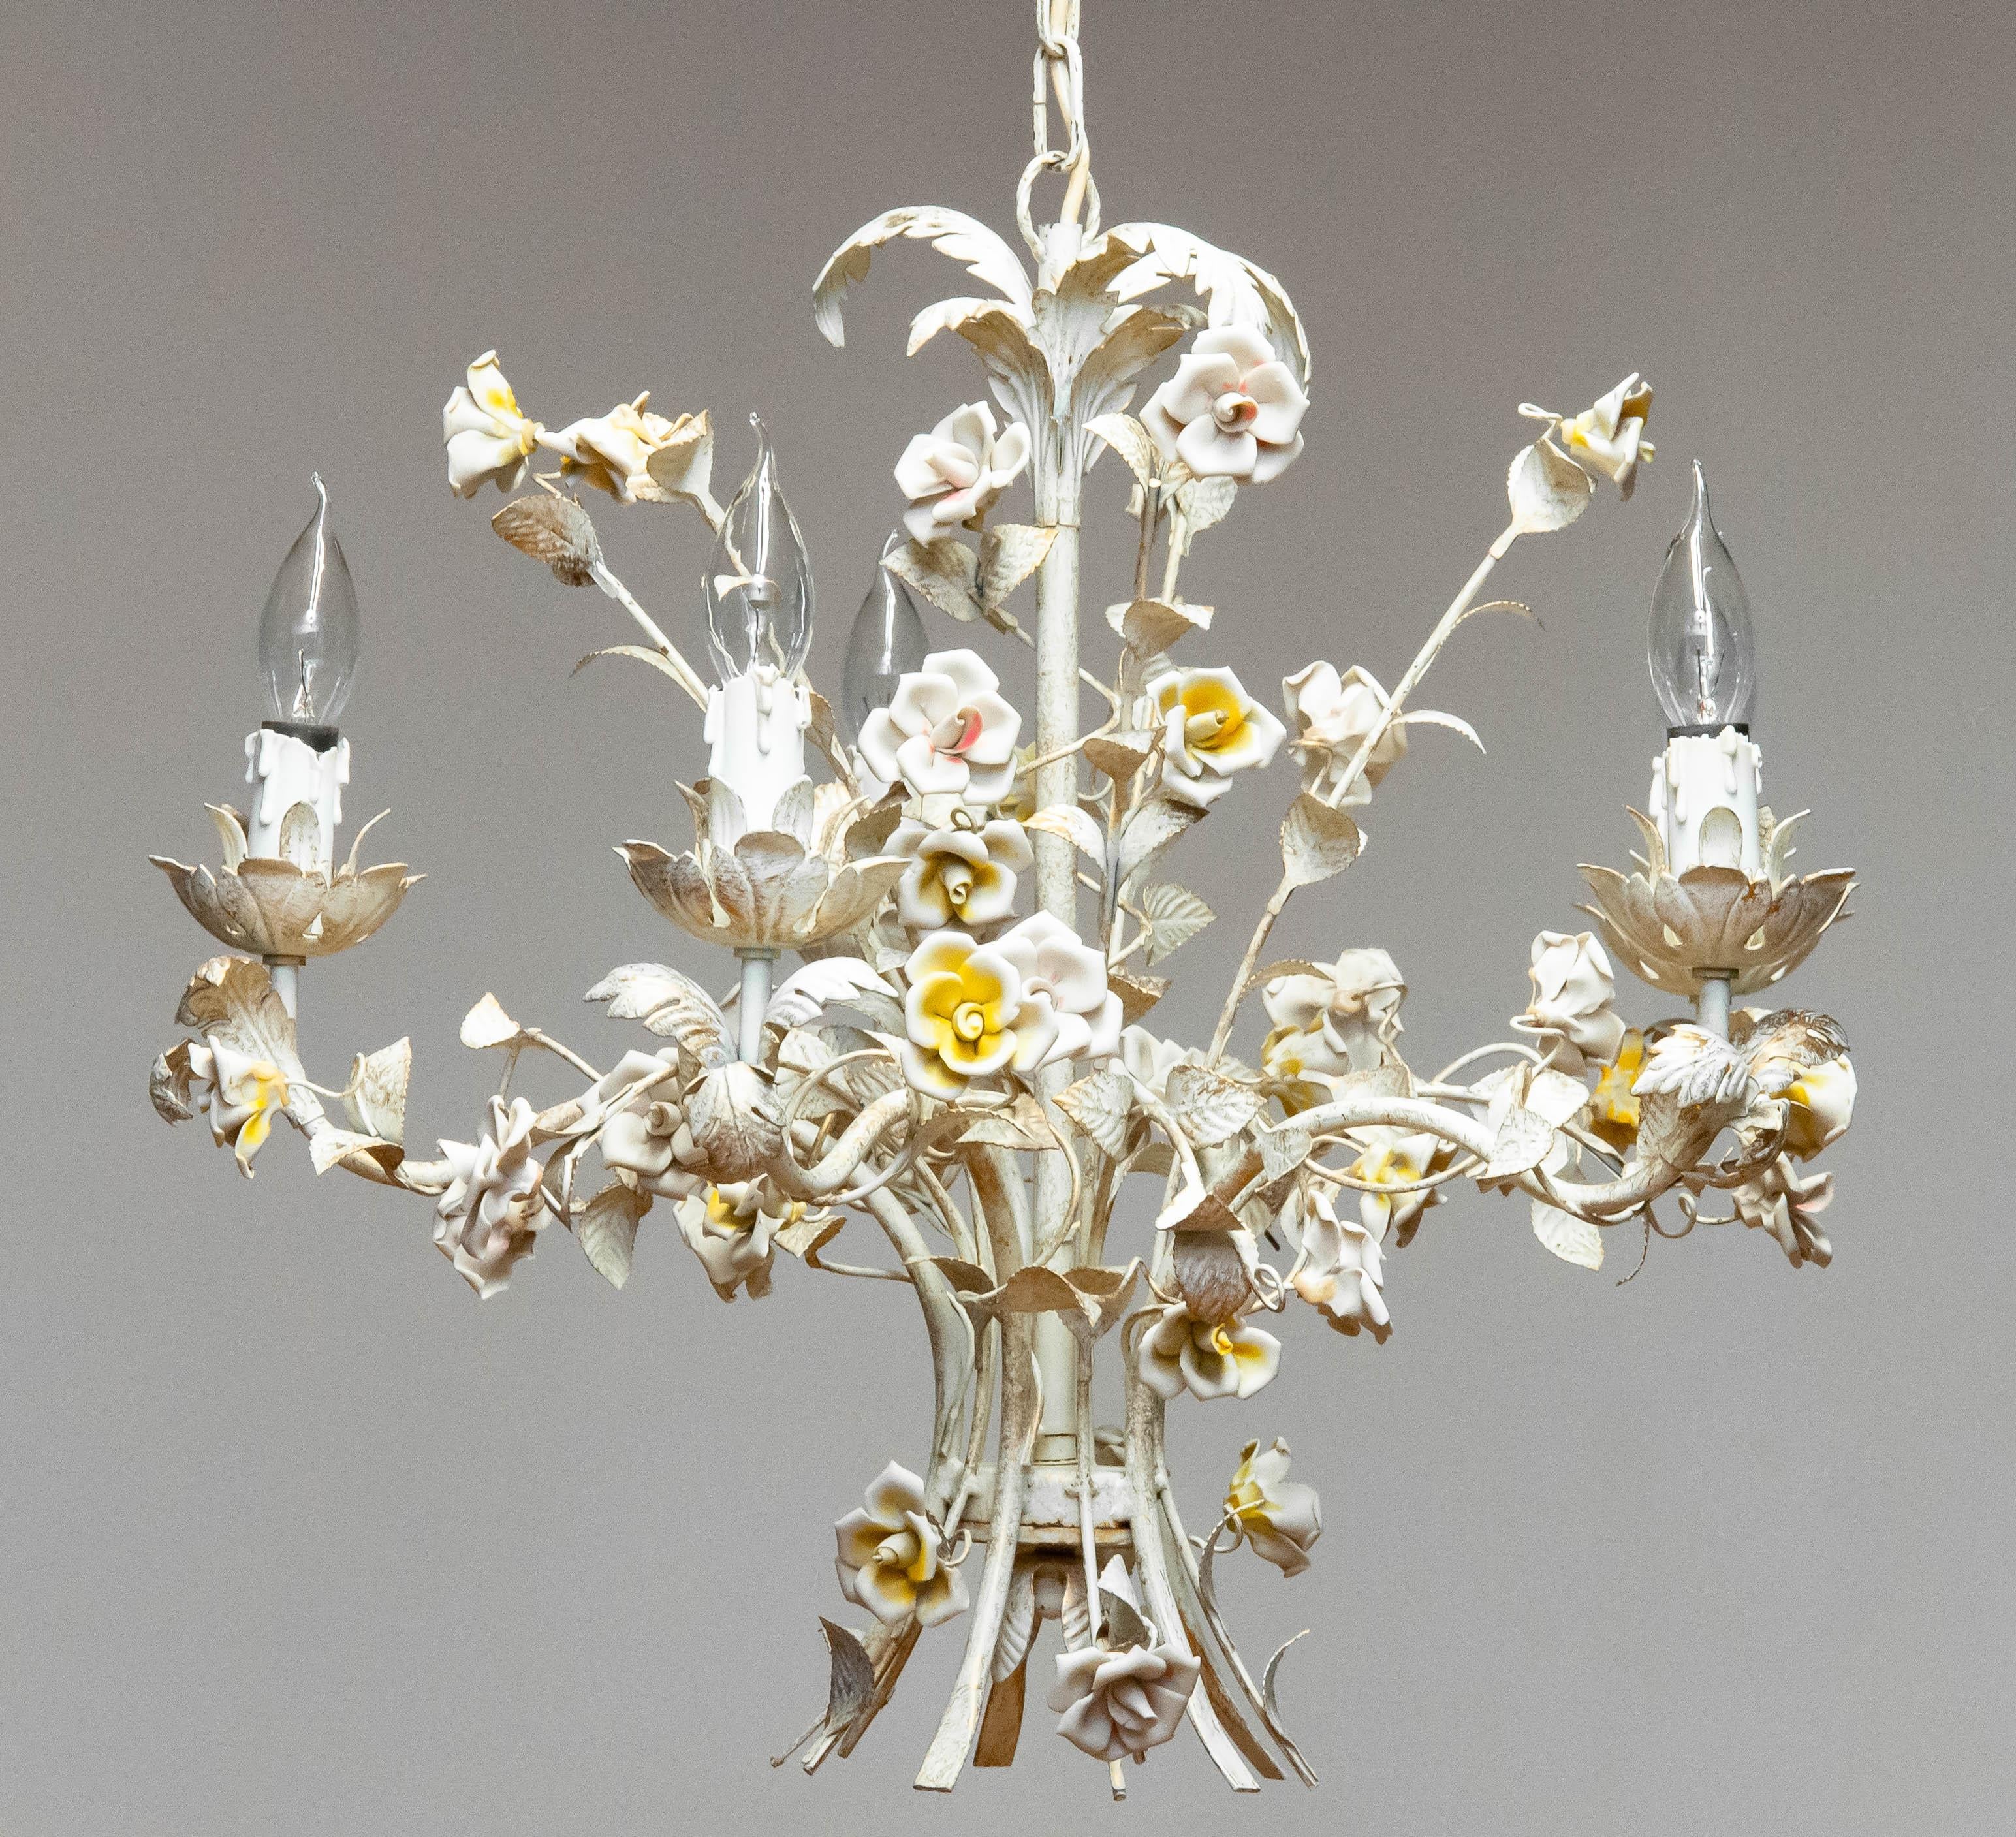 1960s Boho Chic Italian Pastel Color Painted Metal Chandelier With Floral Decor For Sale 1